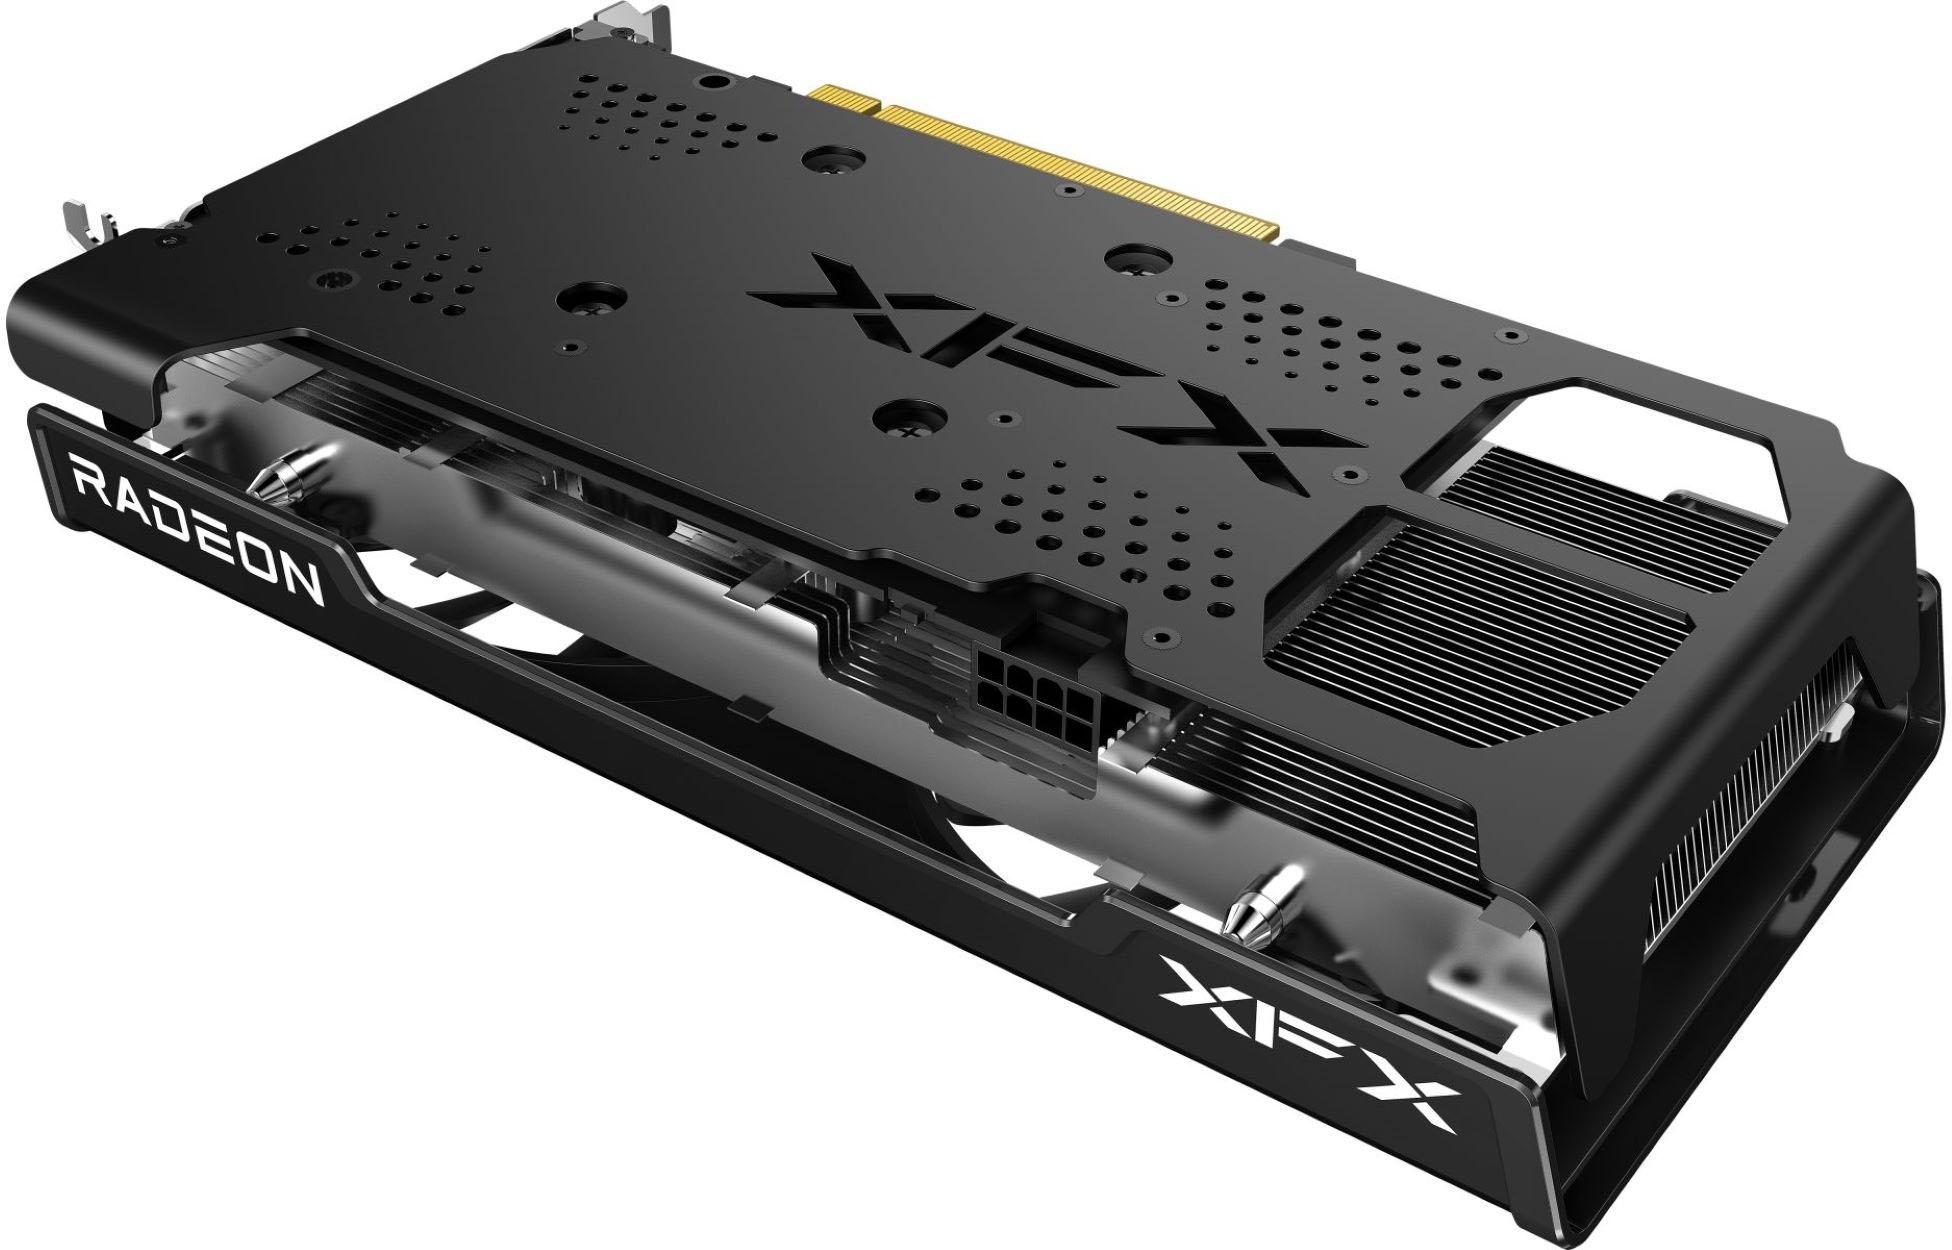 XFX Speedster SWFT210 AMD Radeon RX 6600 GDDR6 Graphics Card for $229.99 Shipped